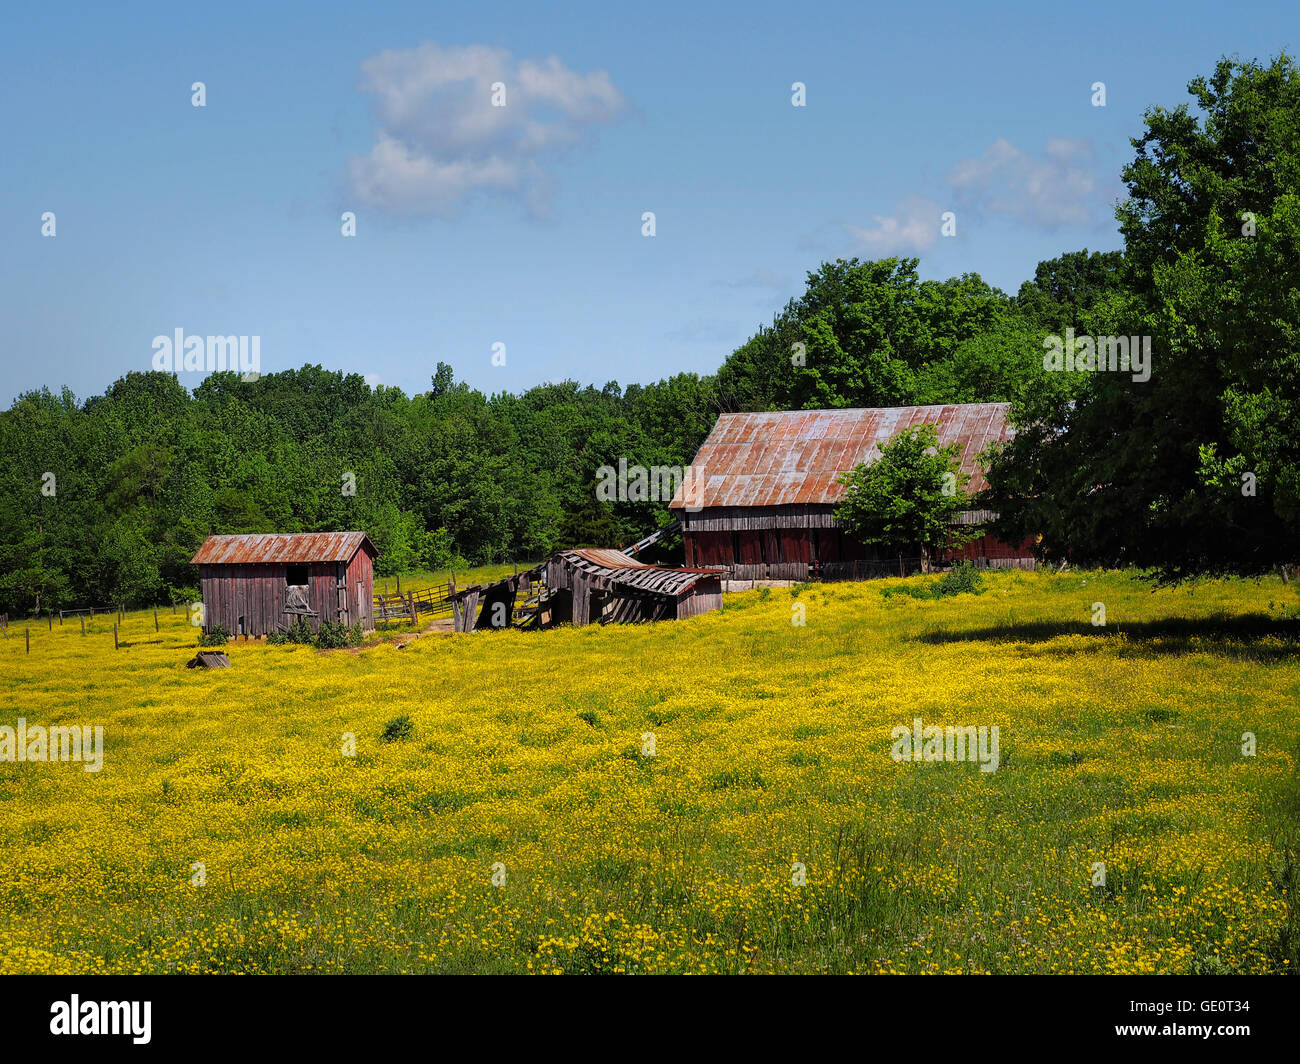 Agricultural farm buildings in Ohio USA. Red barns in yellow fields under blue skies Stock Photo